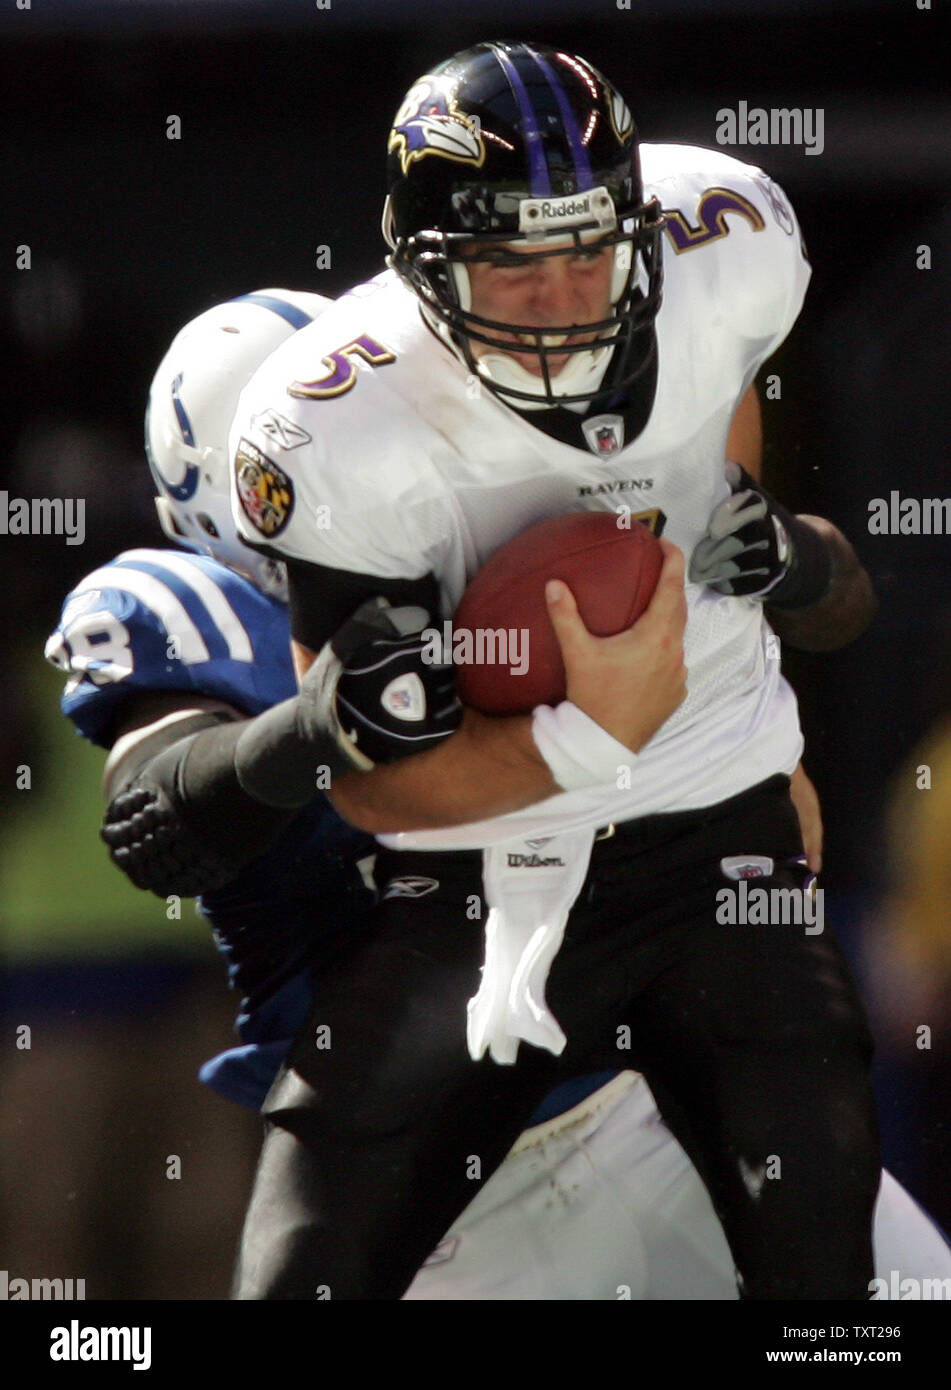 Baltimore Ravens quarterback Joe Flacco (5) is sacked by Indianapolis Colts defensive end Robert Mathis (98) during the second quarter at Lucas Oil Field in Indianapolis on October 12, 2008.  (UPI Photo/Mark Cowan) Stock Photo